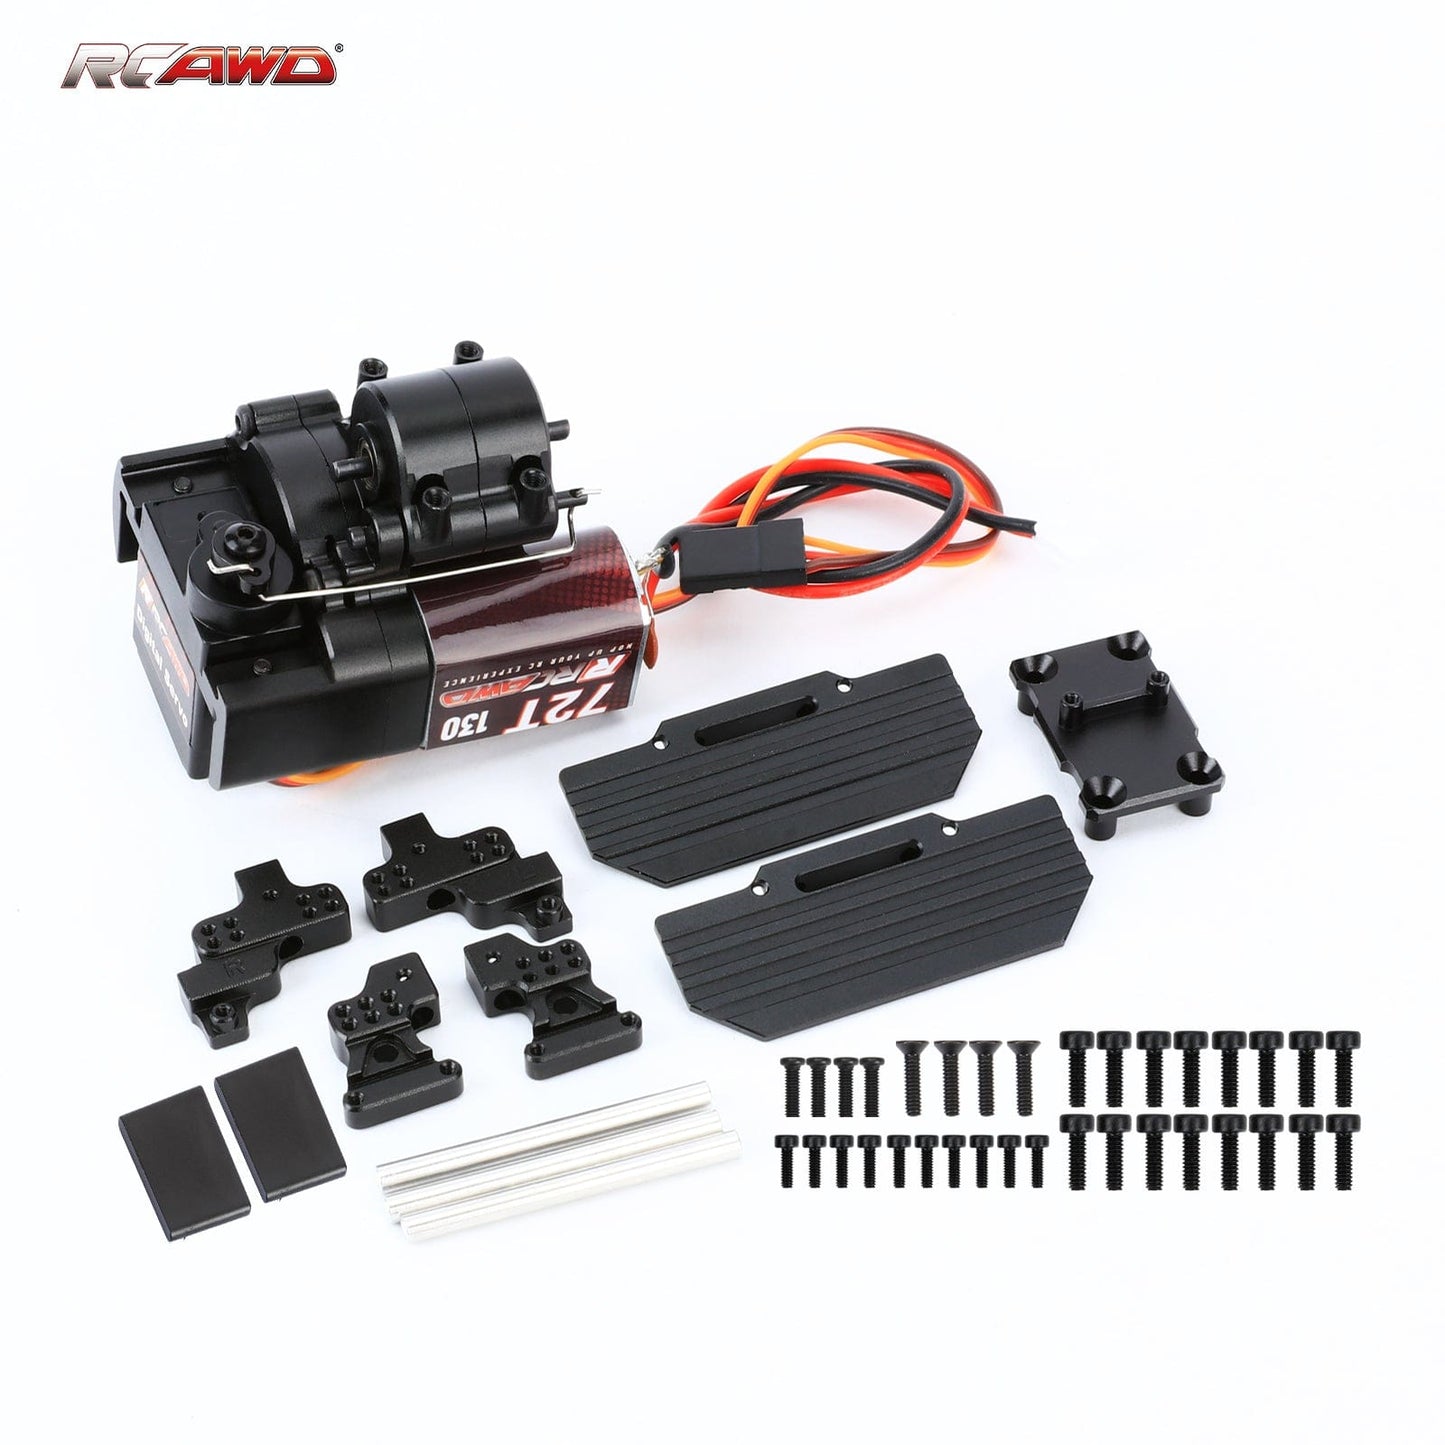 RCAWD Axial SCX24 Upgrades 72T 130 Motor with 2 speed Transmission Gearbox and Mounts Set - RCAWD